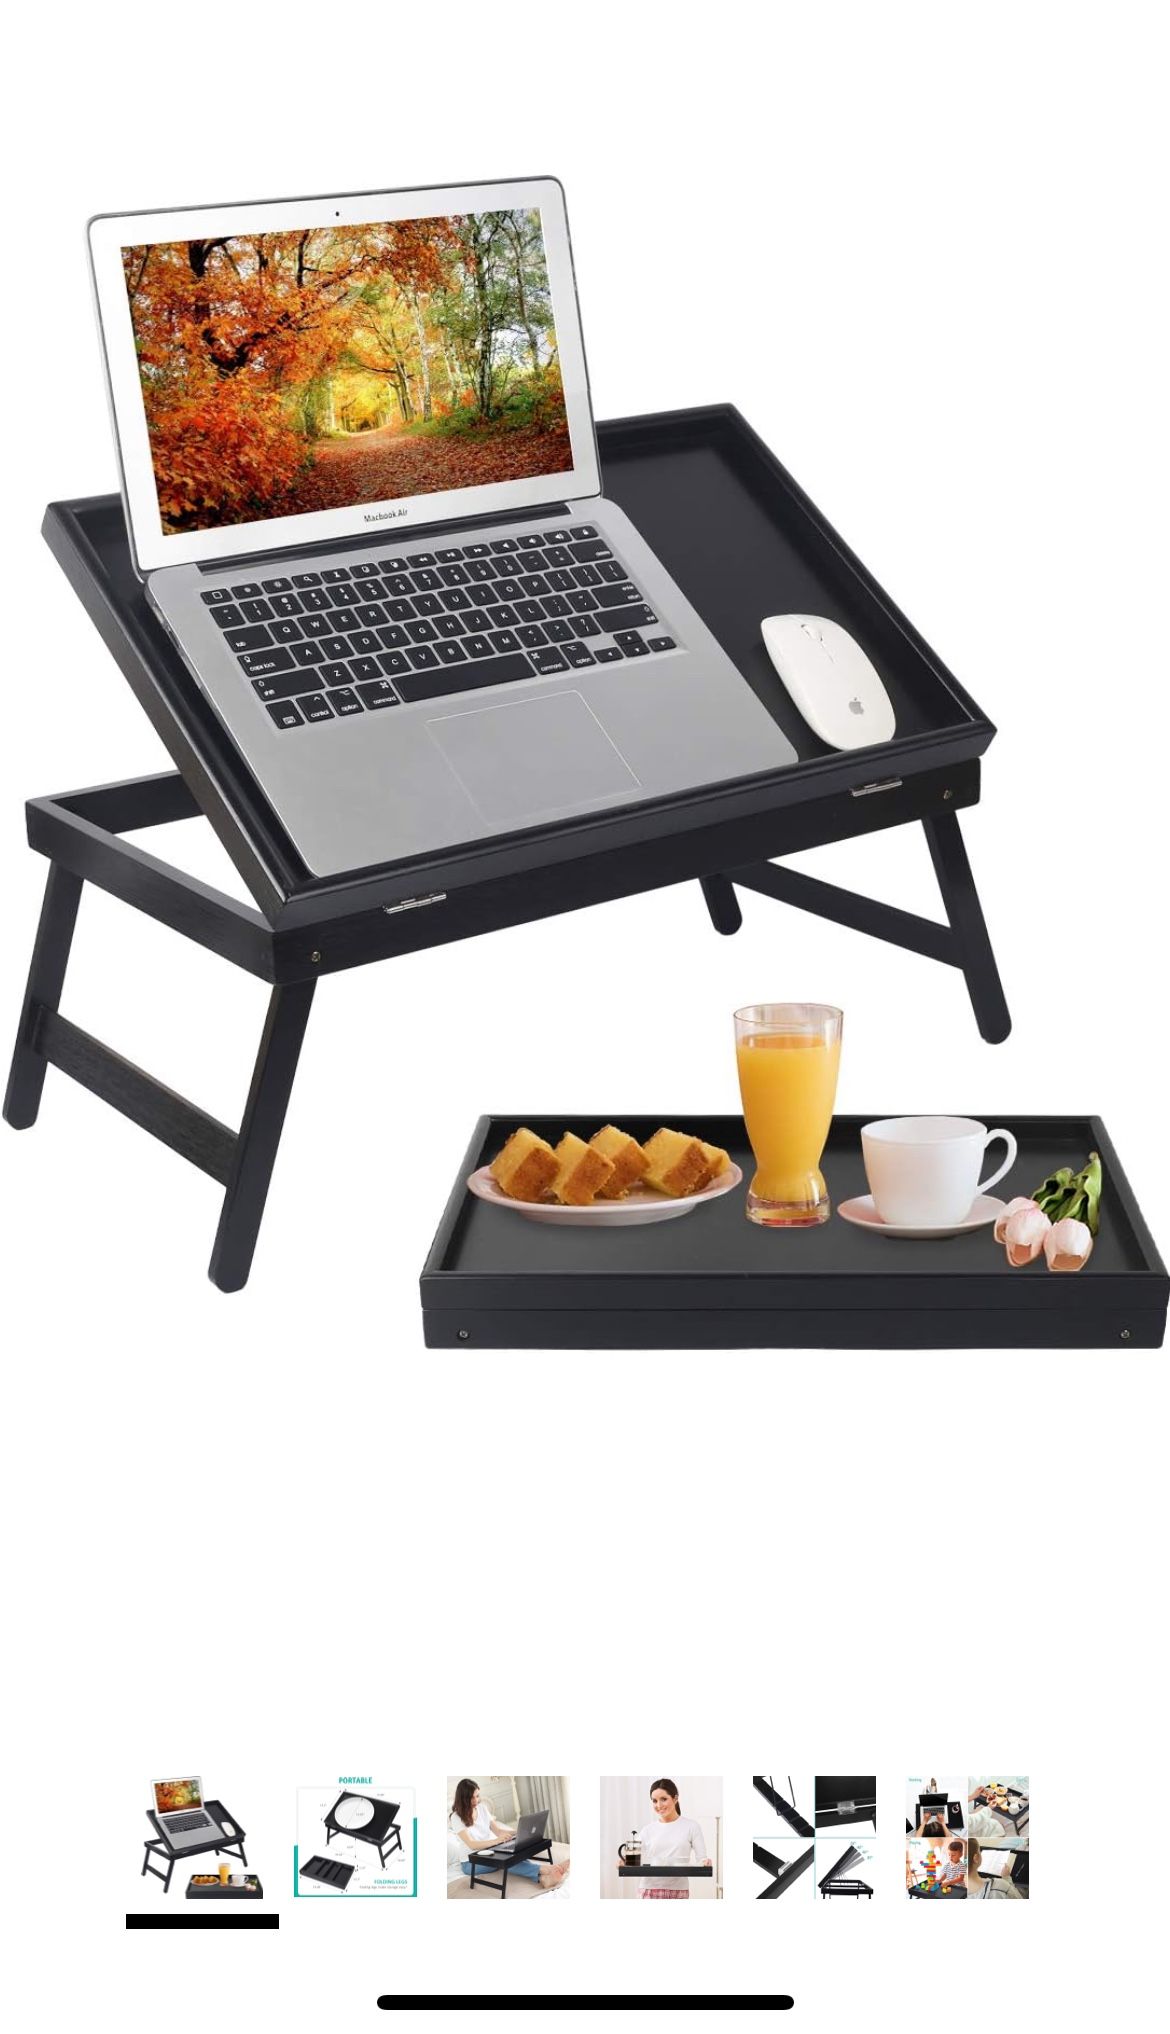 Bed Tray Table Food Tray With Folding Legs For Laptops (Black)